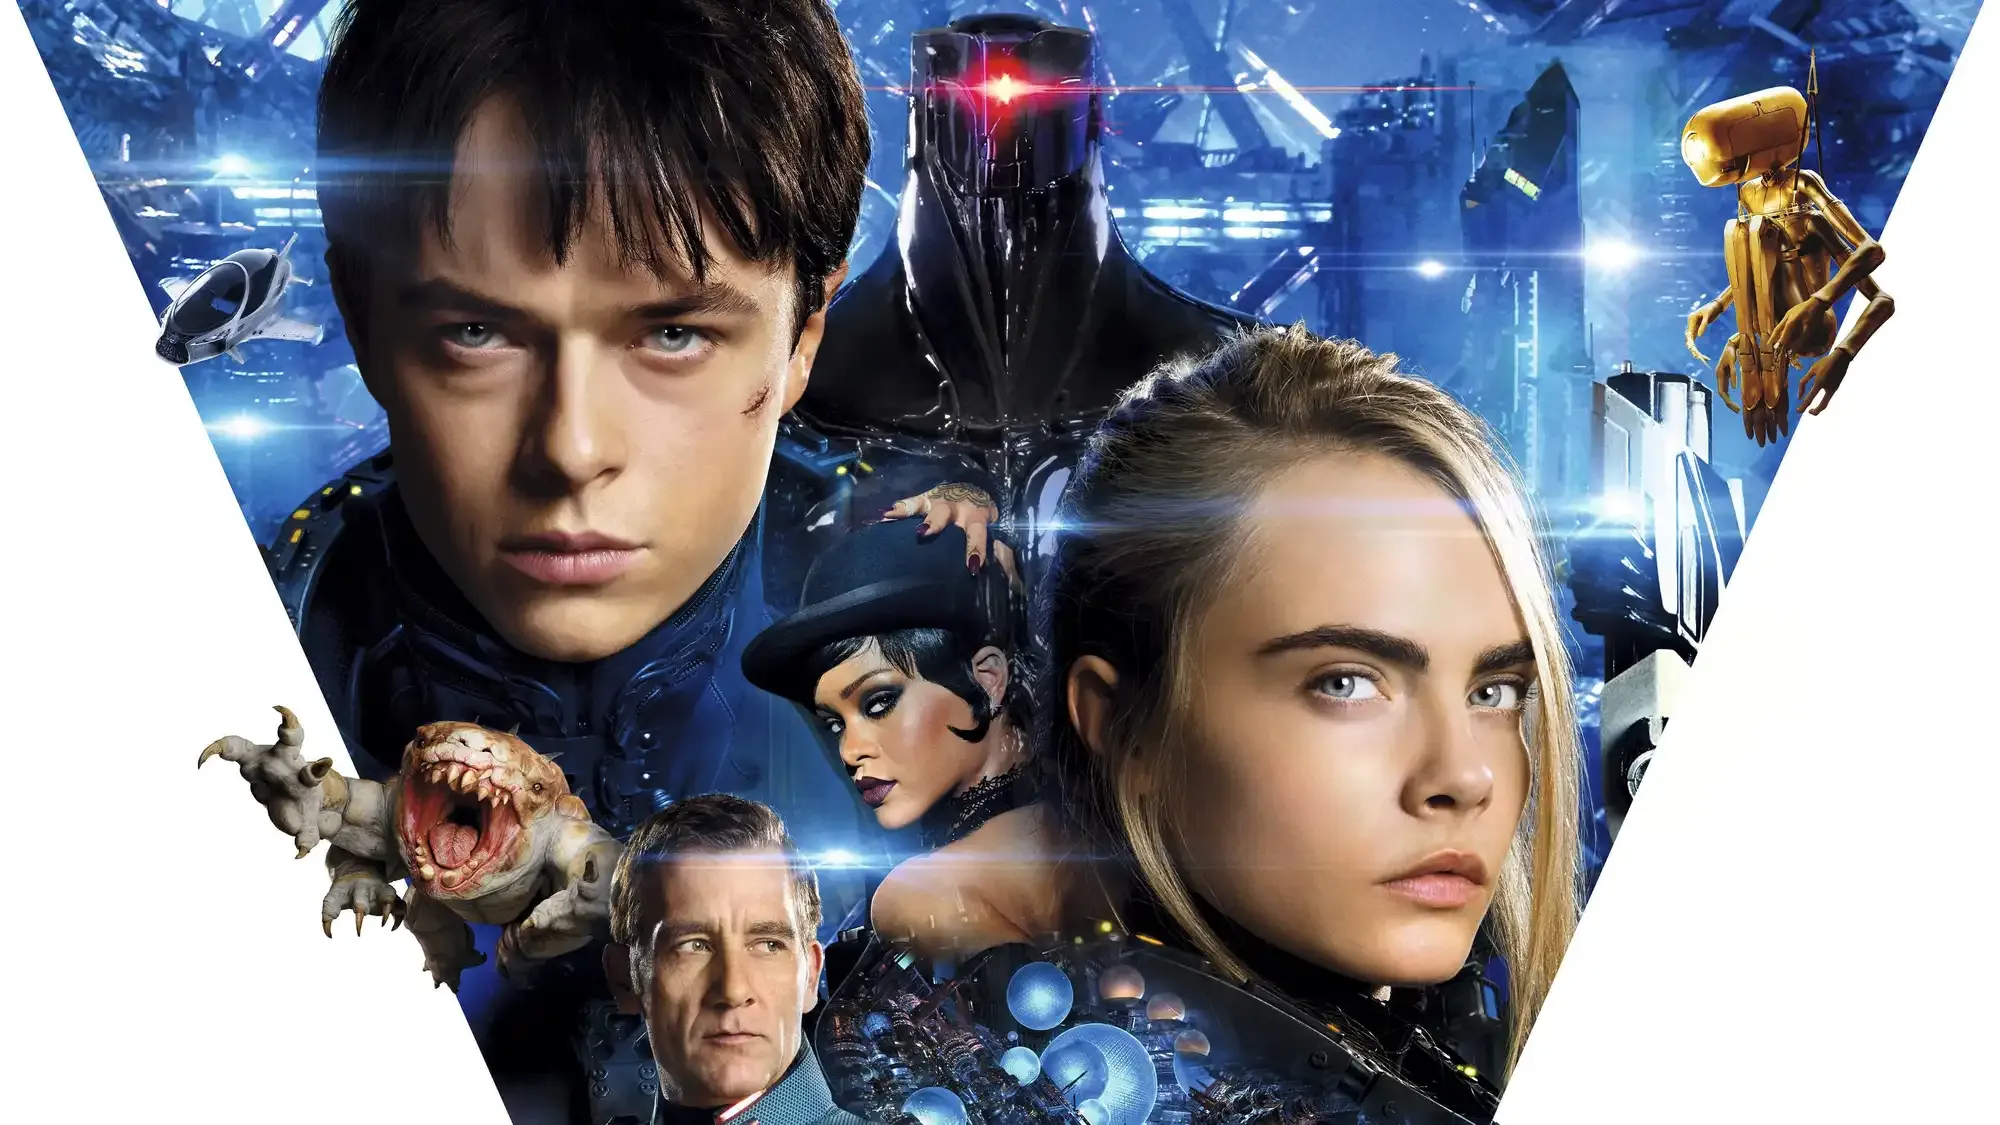 Valerian and the City of a Thousand Planets movie review